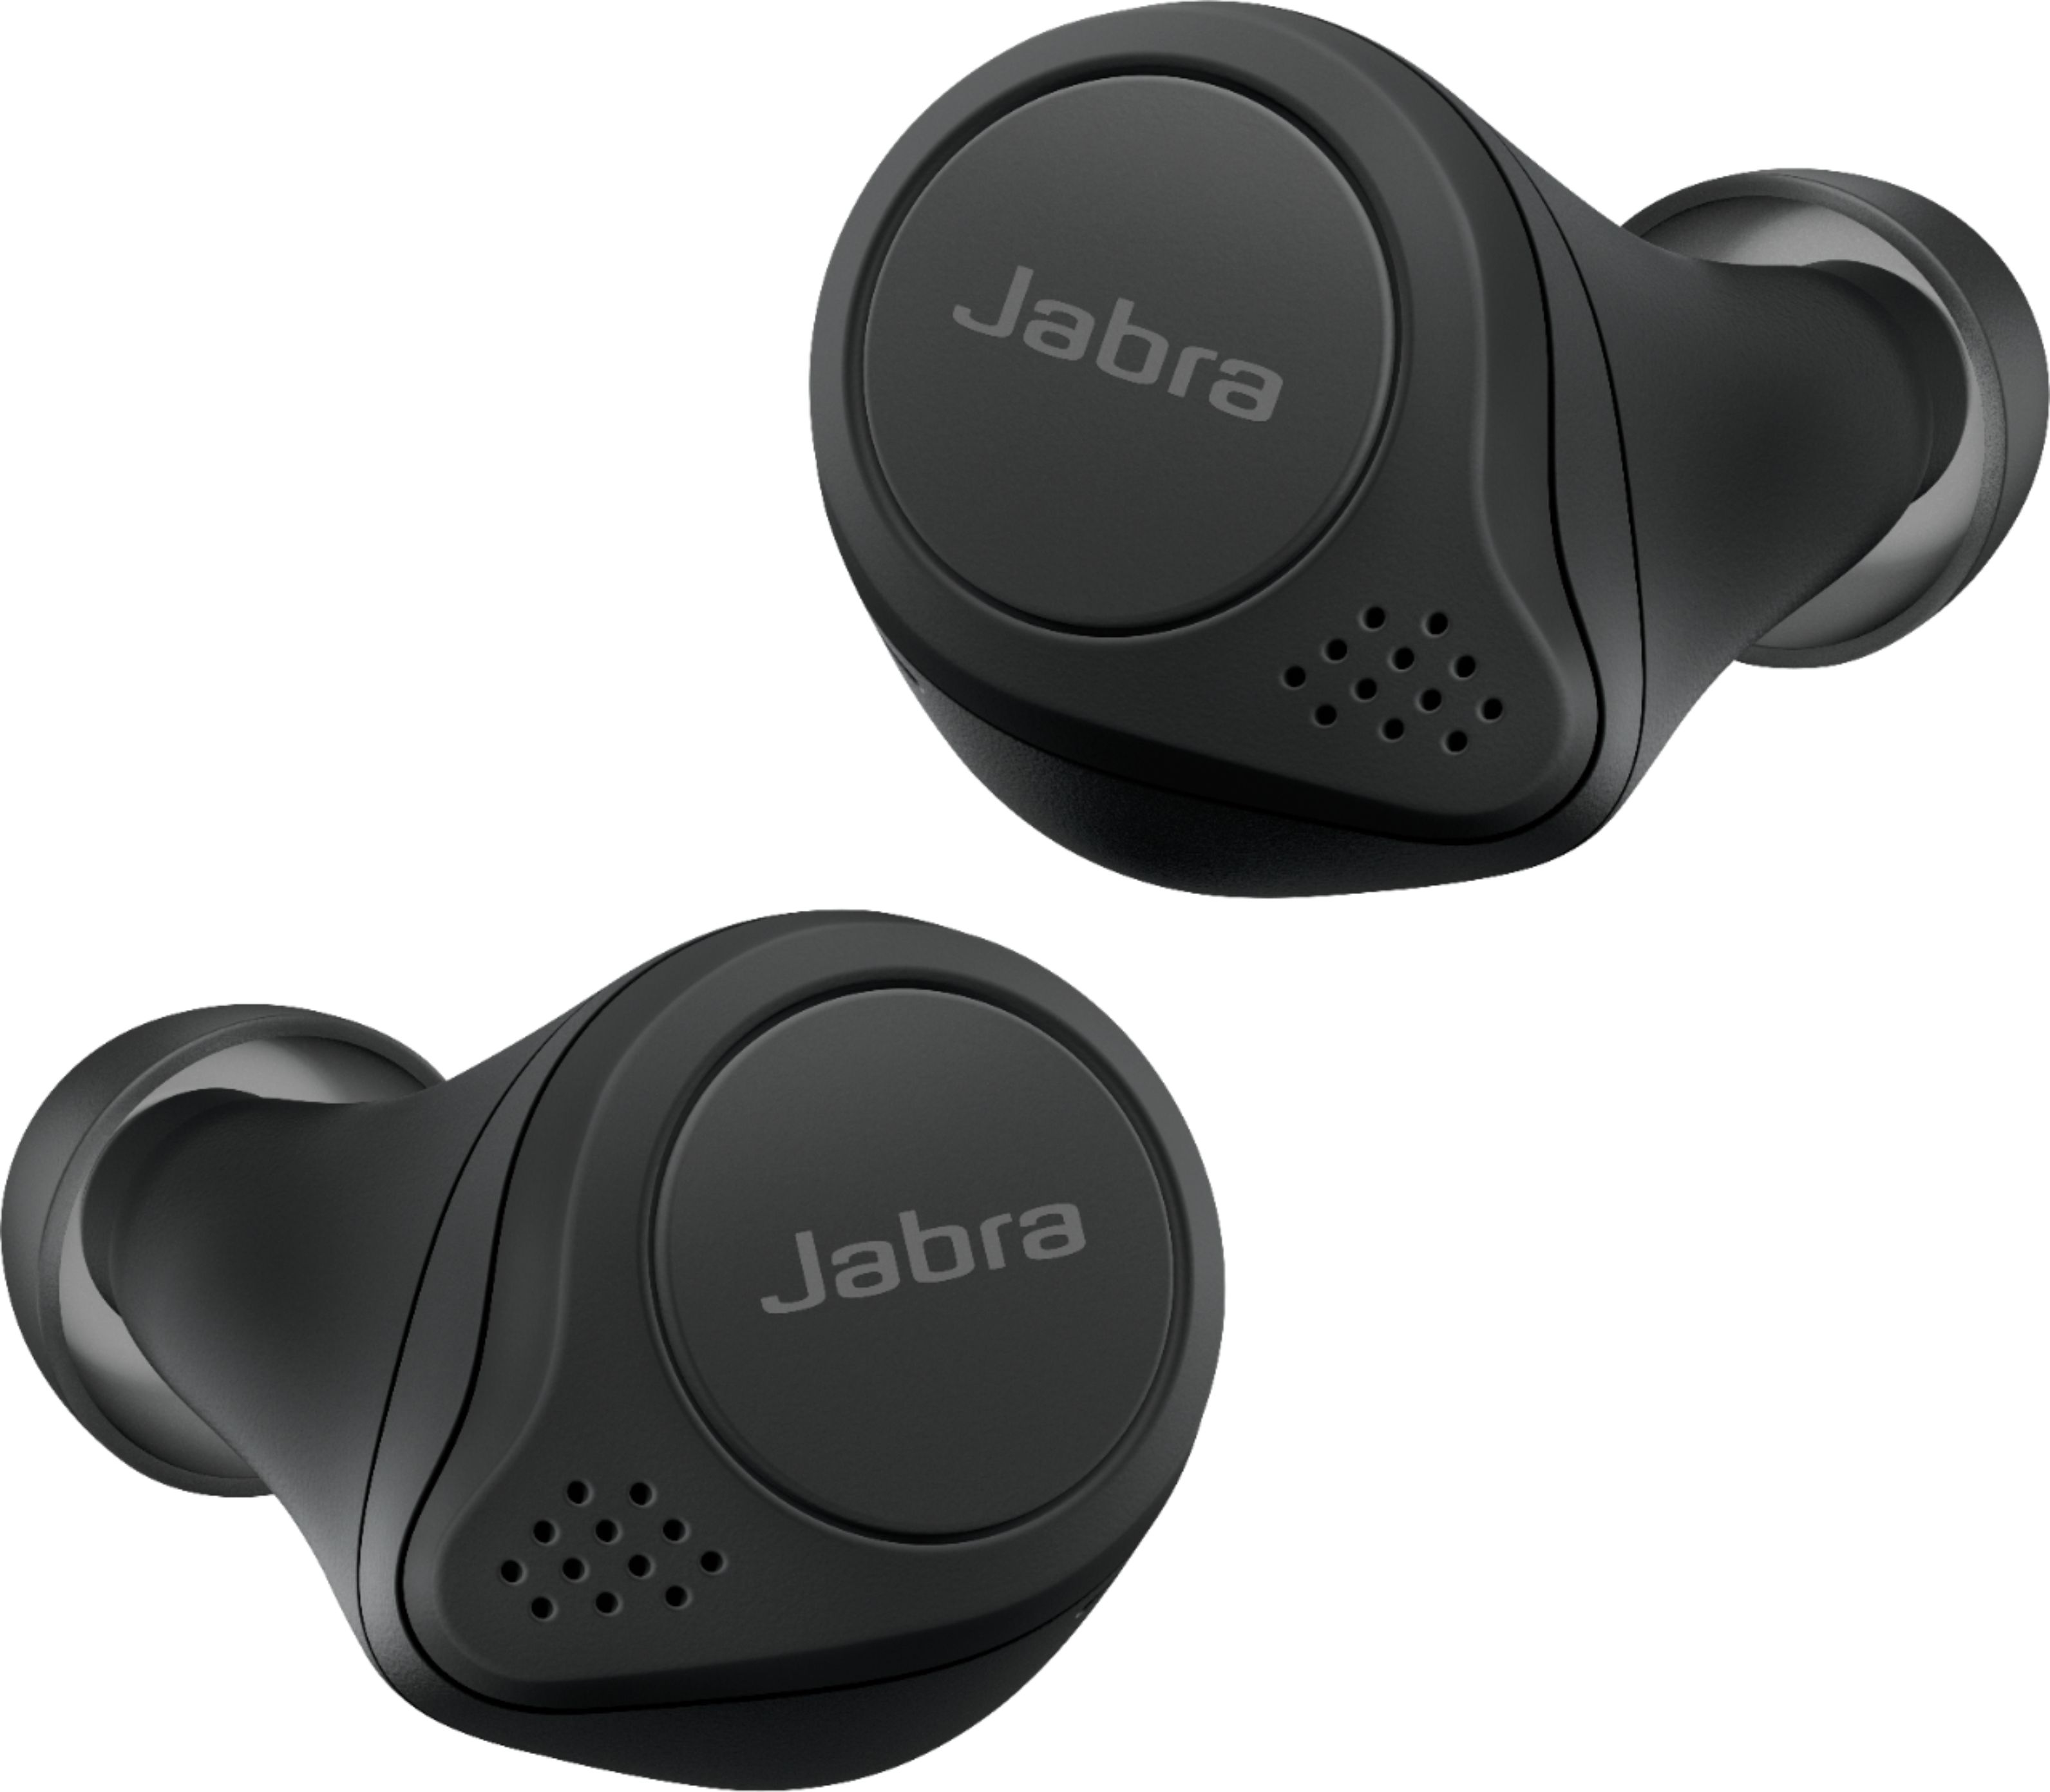 Jabra's new rugged earbuds could be the durable headphones a clutz like me  has been looking for